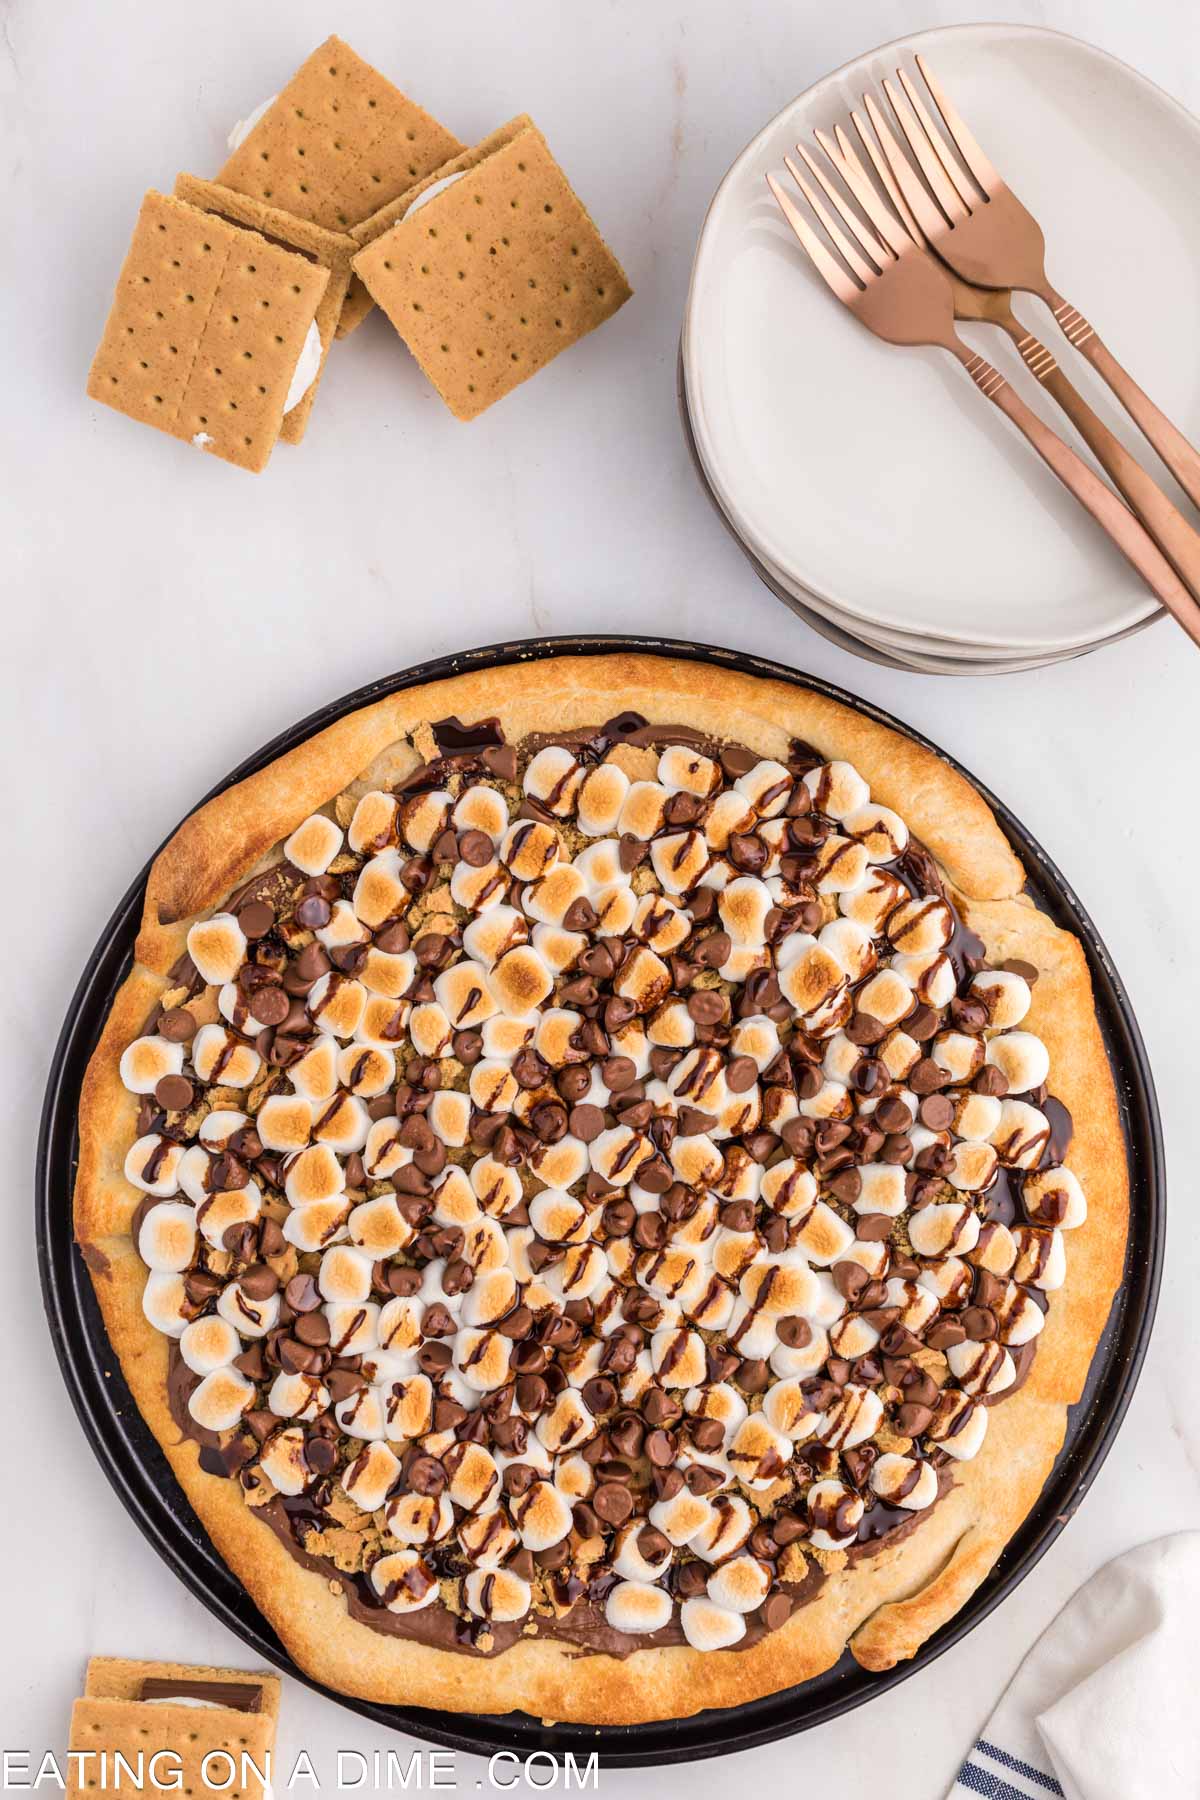 Whole Smores Pizza